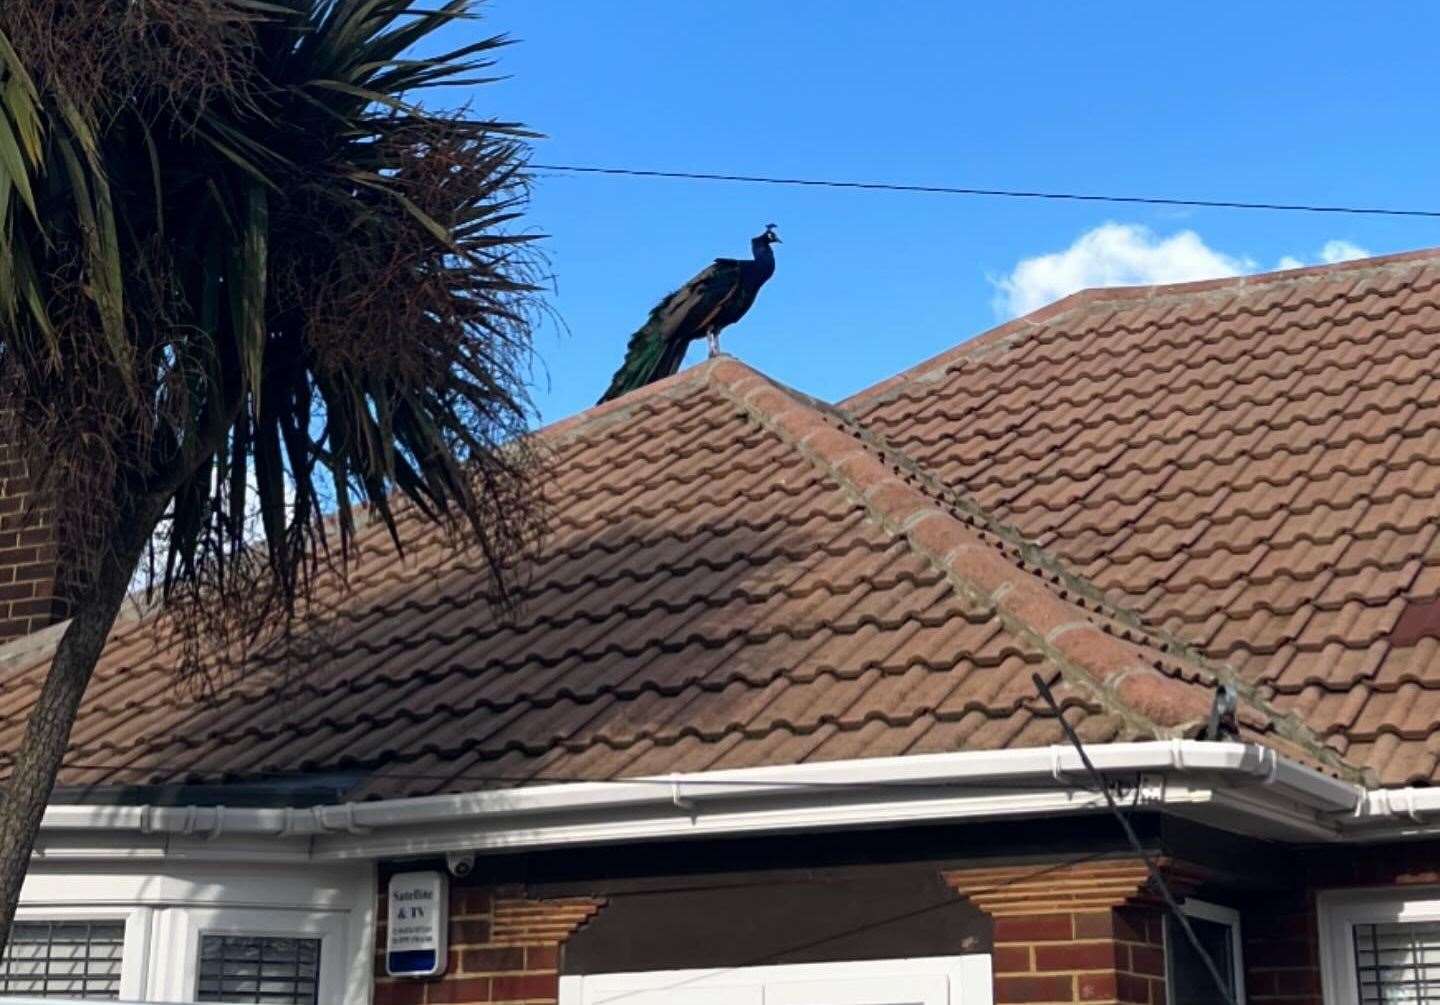 The peacock was roaming around gardens and hopping onto fences and roofs